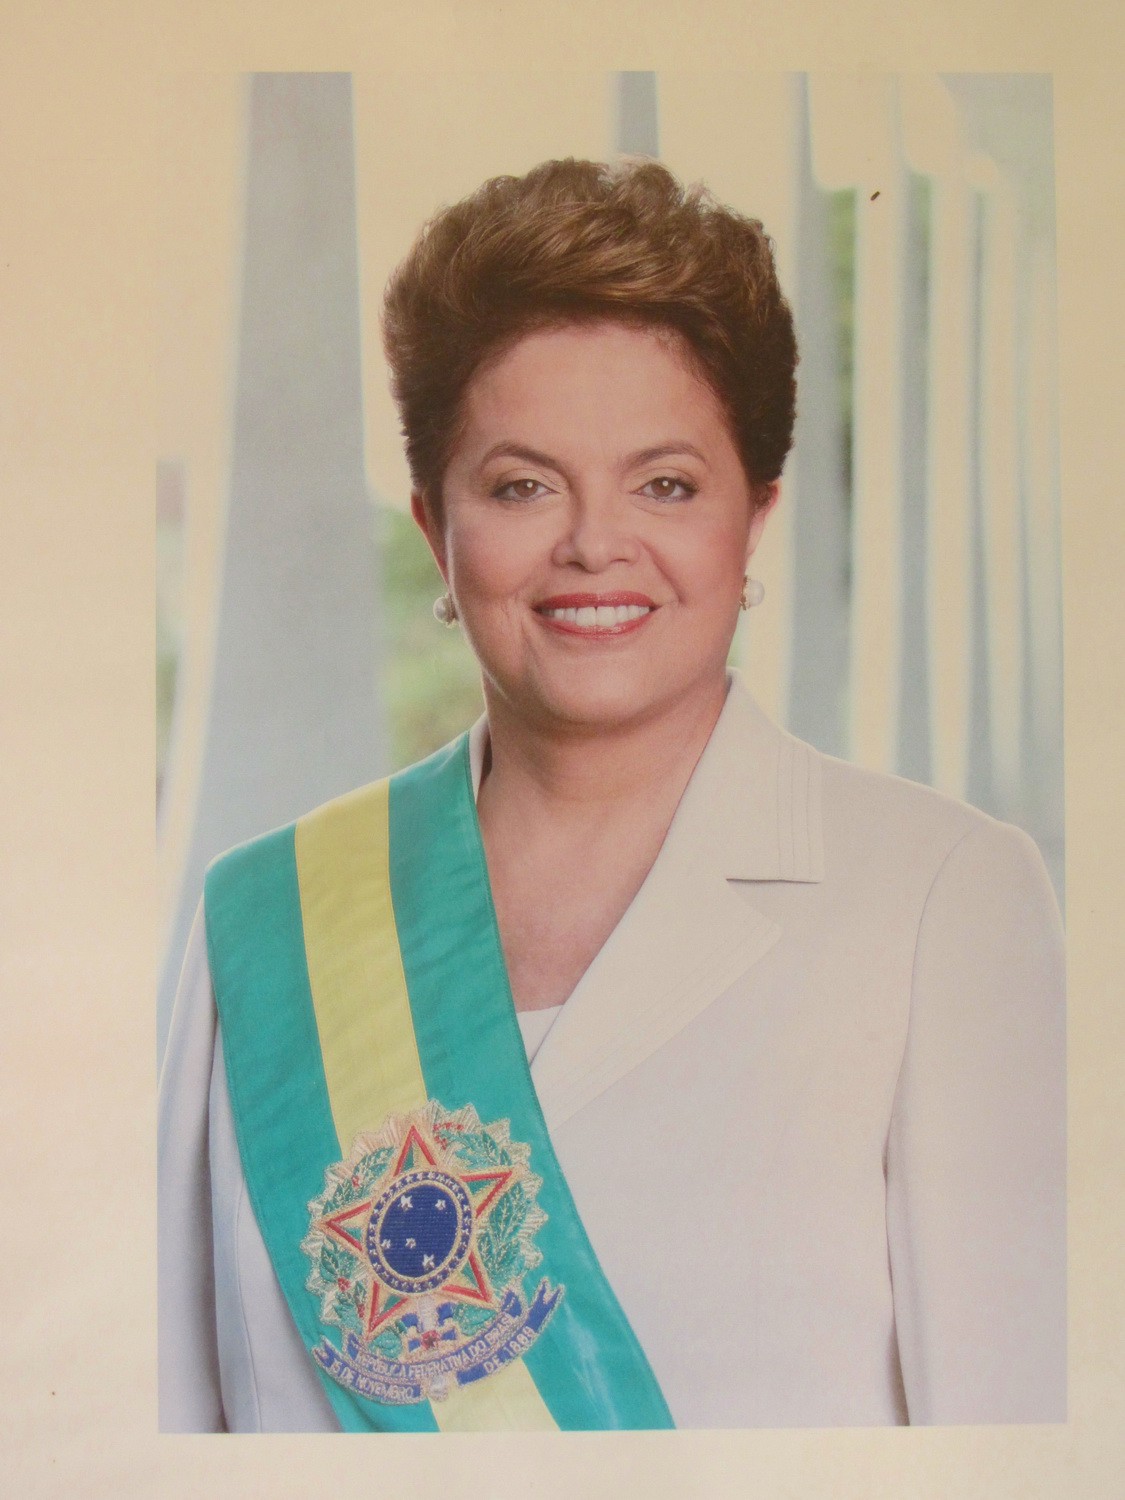 Dilma Rousseff, the President of Brazil